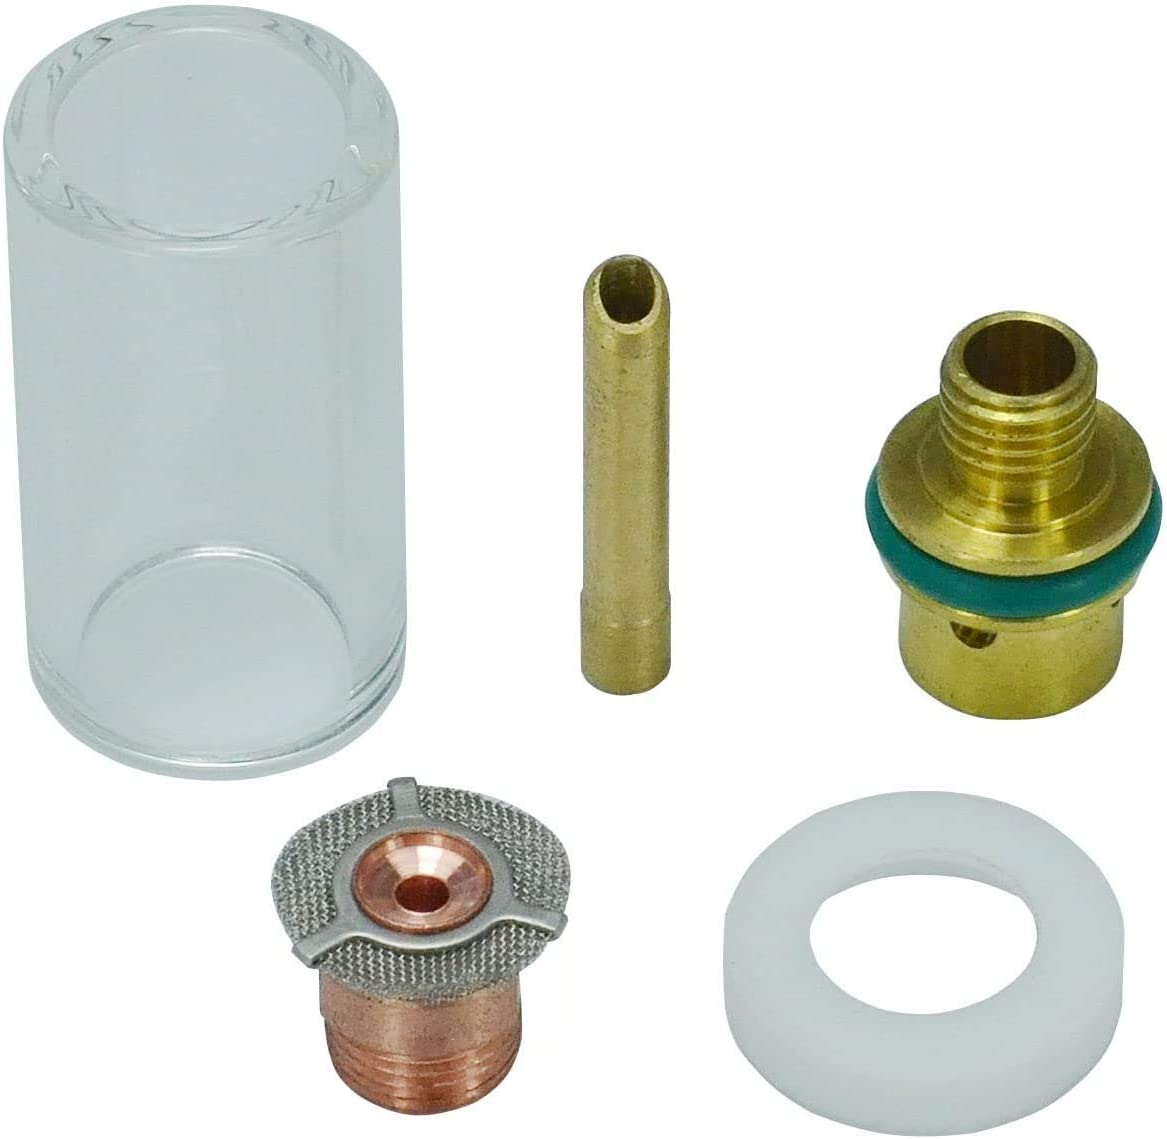 TIG Insulated Glass Cup (9/16" x 1-5/16") Kit Wedge Collet Tungsten Apdapter/Gas Saver (1/8" & 3.2mm) and Silicone Cup Heatshield for WP SR 9 20 25 TIG Welding Torch 5pcs